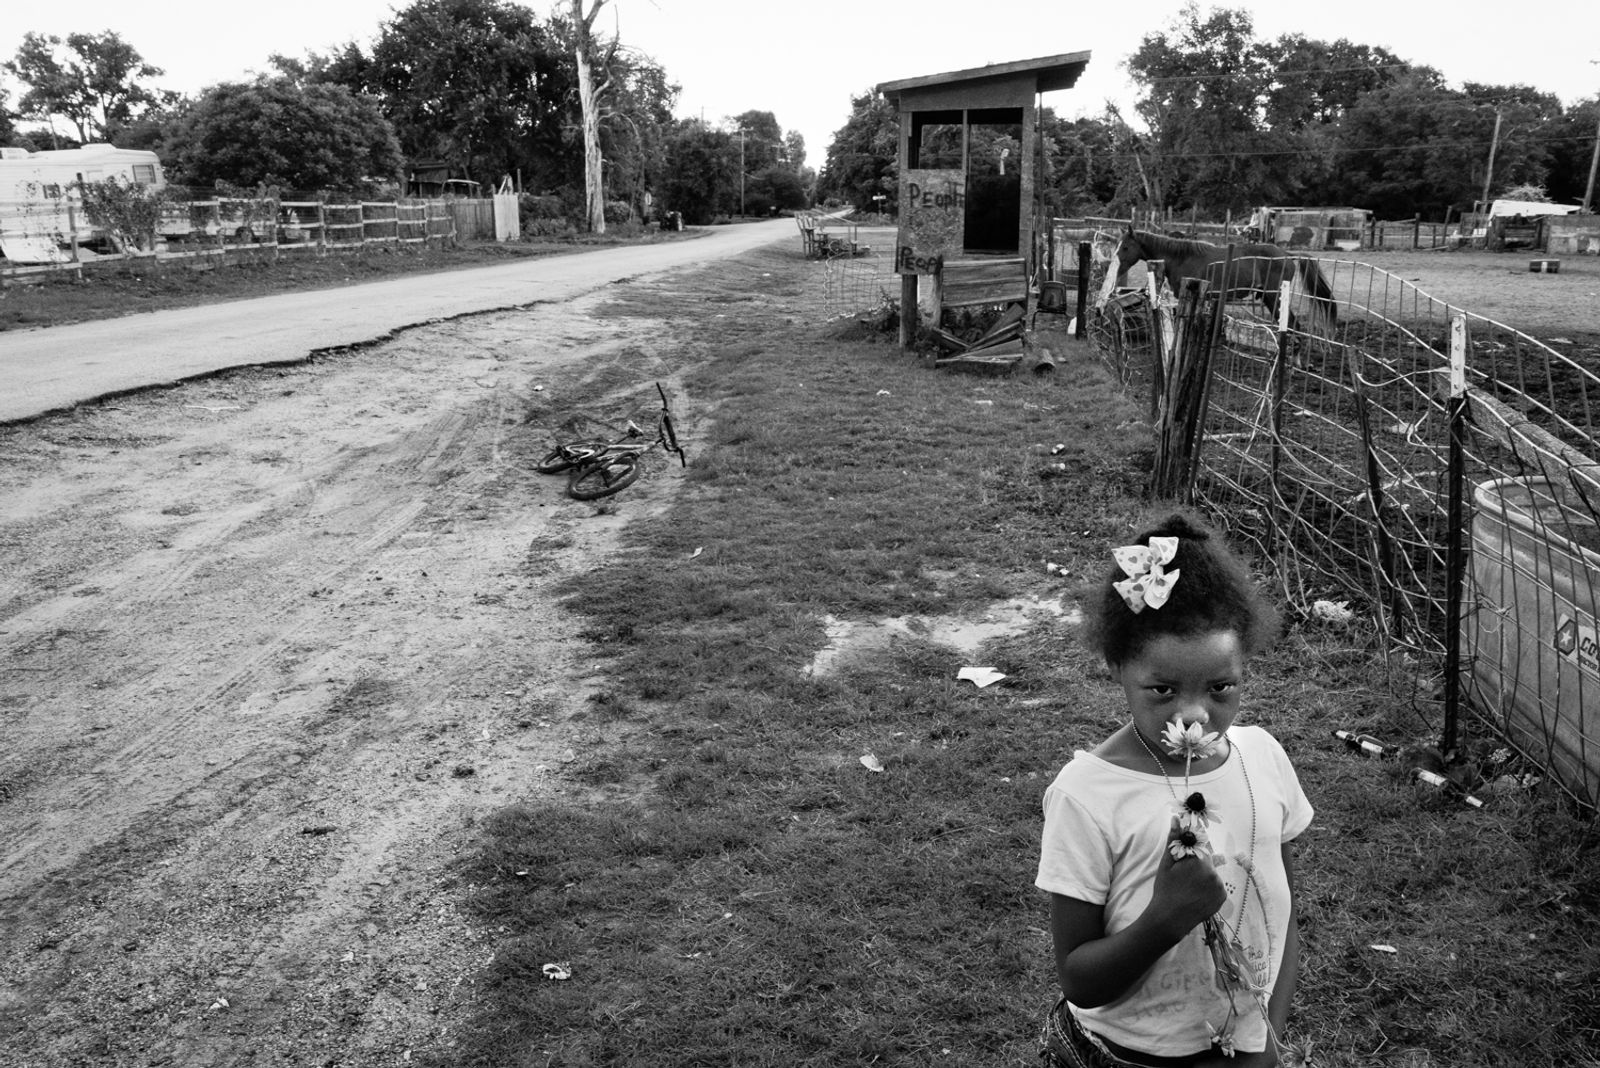 © Richard Sharum - A young girl smells a flower on Bunche Street. She is one of six children that live in Sand Branch. 2019.